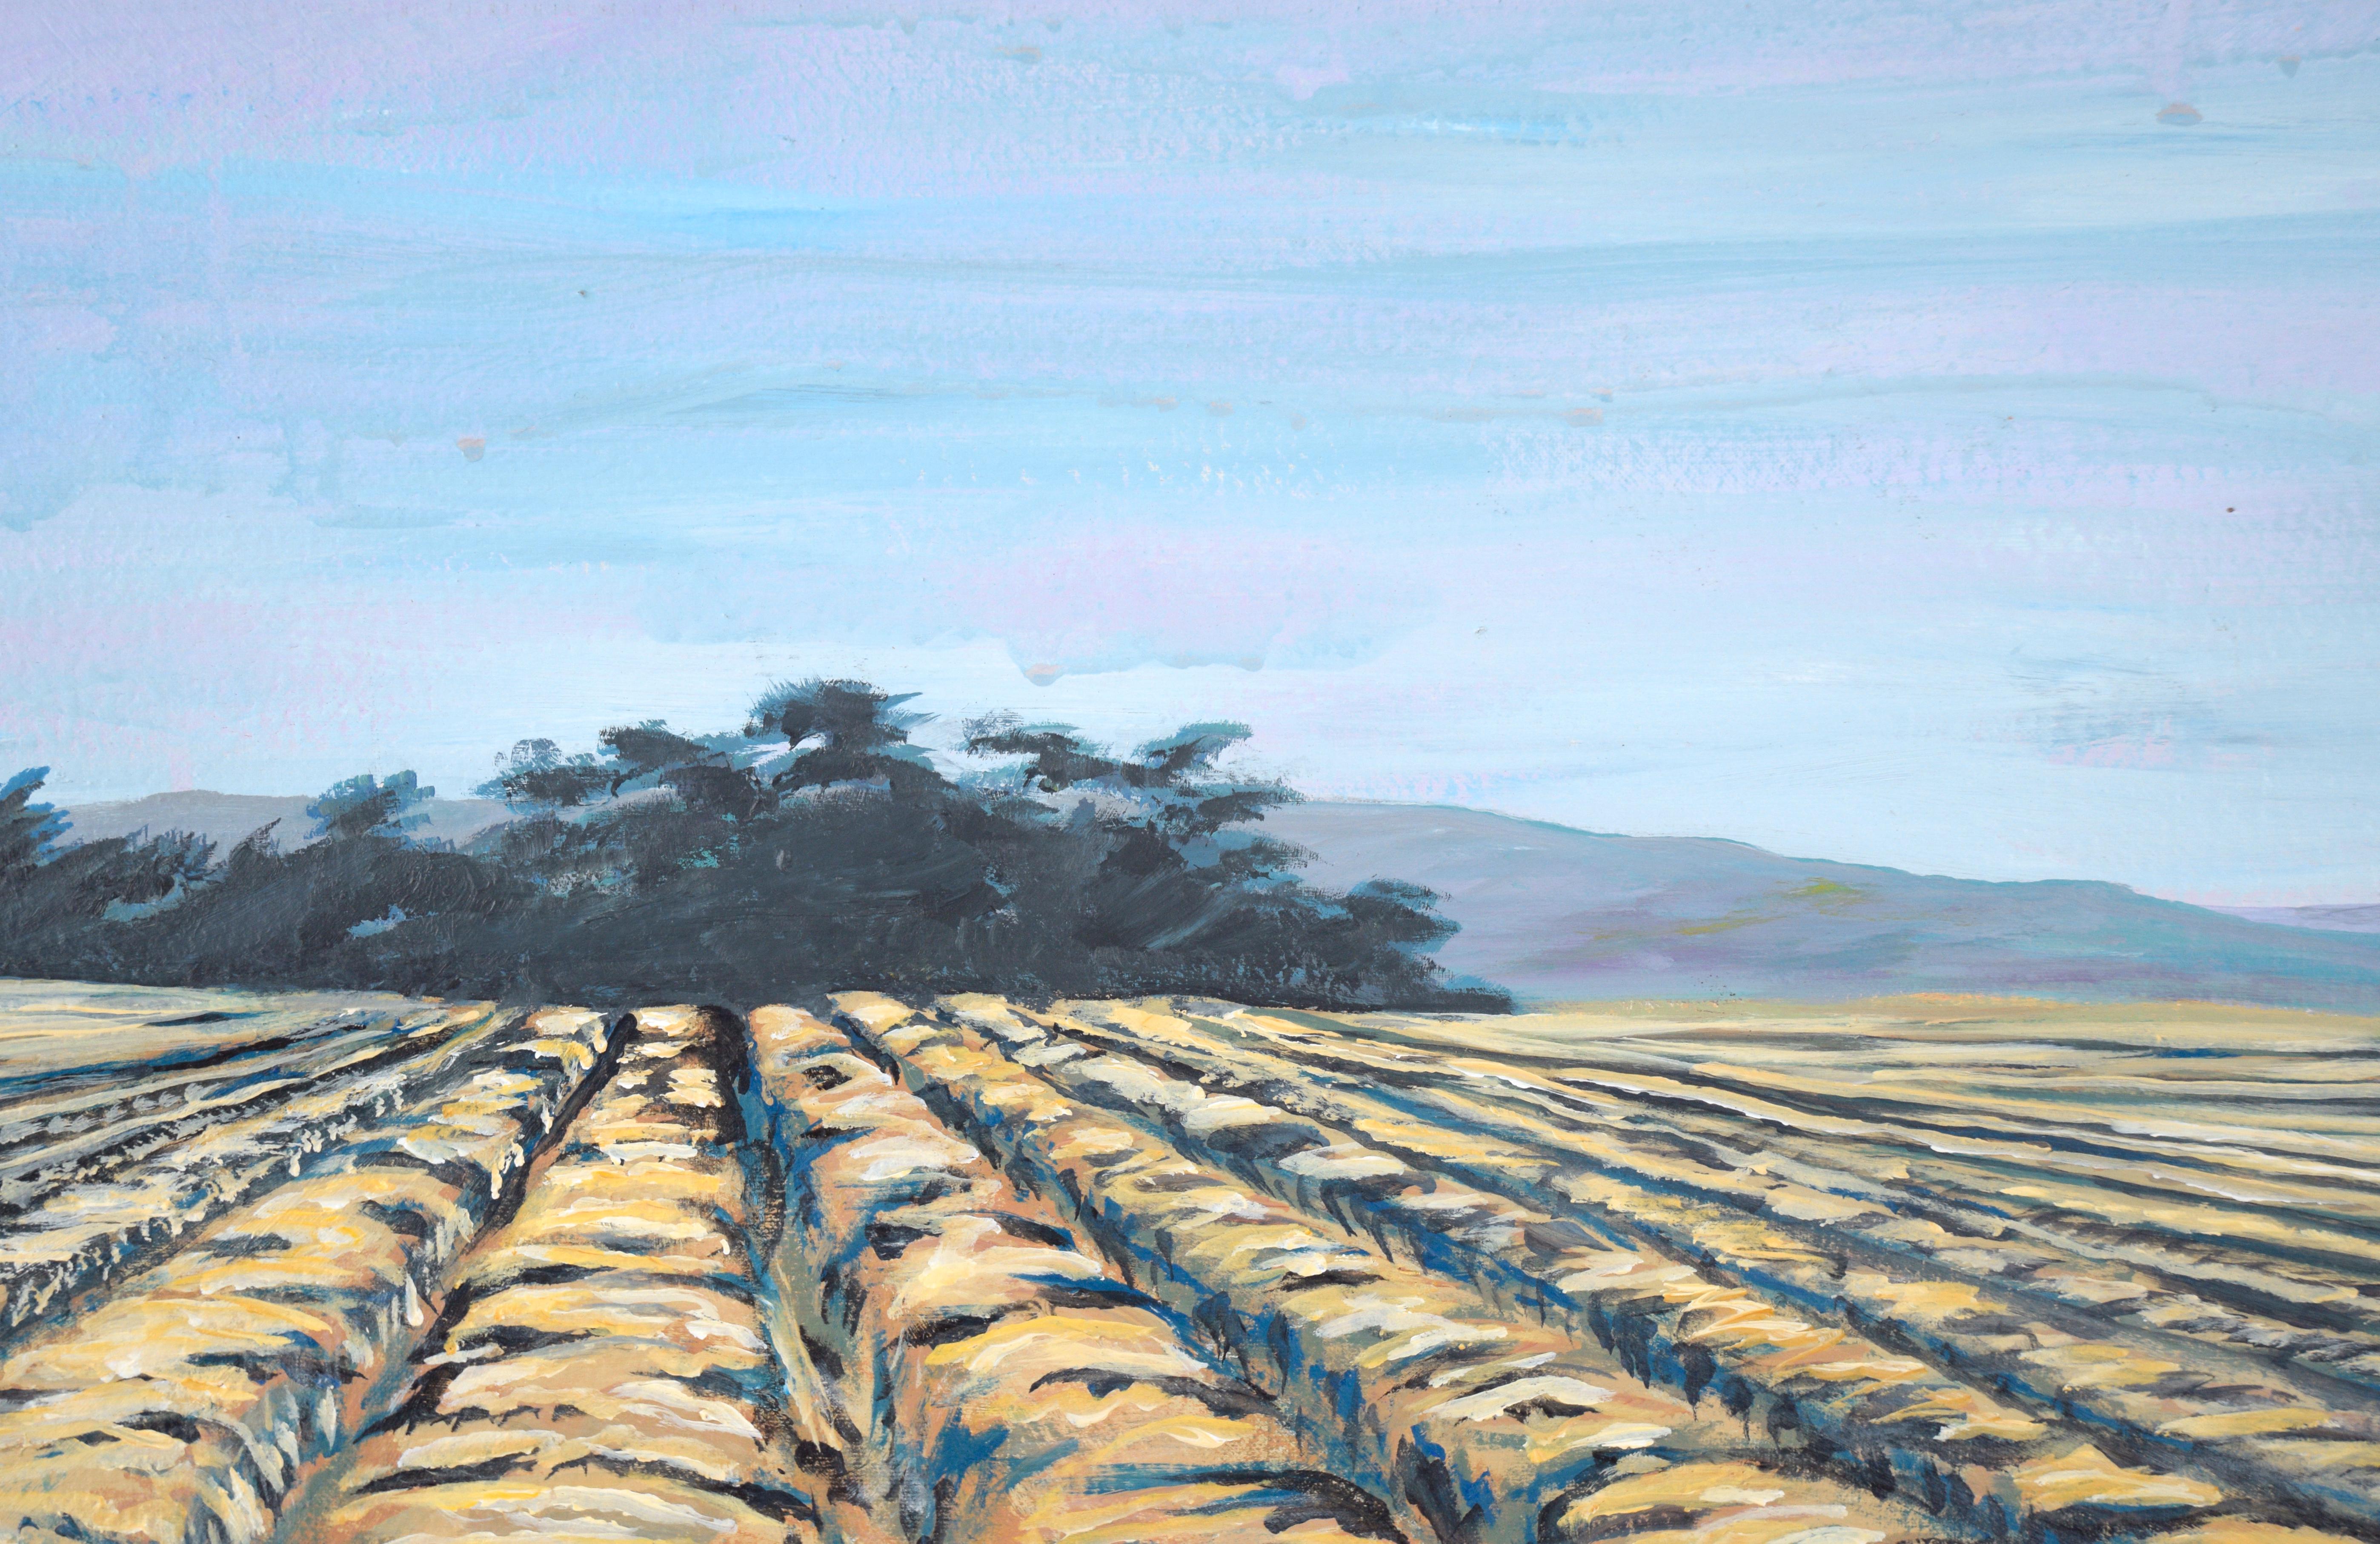 Moss Landing Farm Landscape in Acrylic on Canvas

Expansive farm landscape by a California artist (20th Century), Unknown. The viewer is low to the ground, in the middle of a tilled field. The furrows extend away from the viewer into the distance